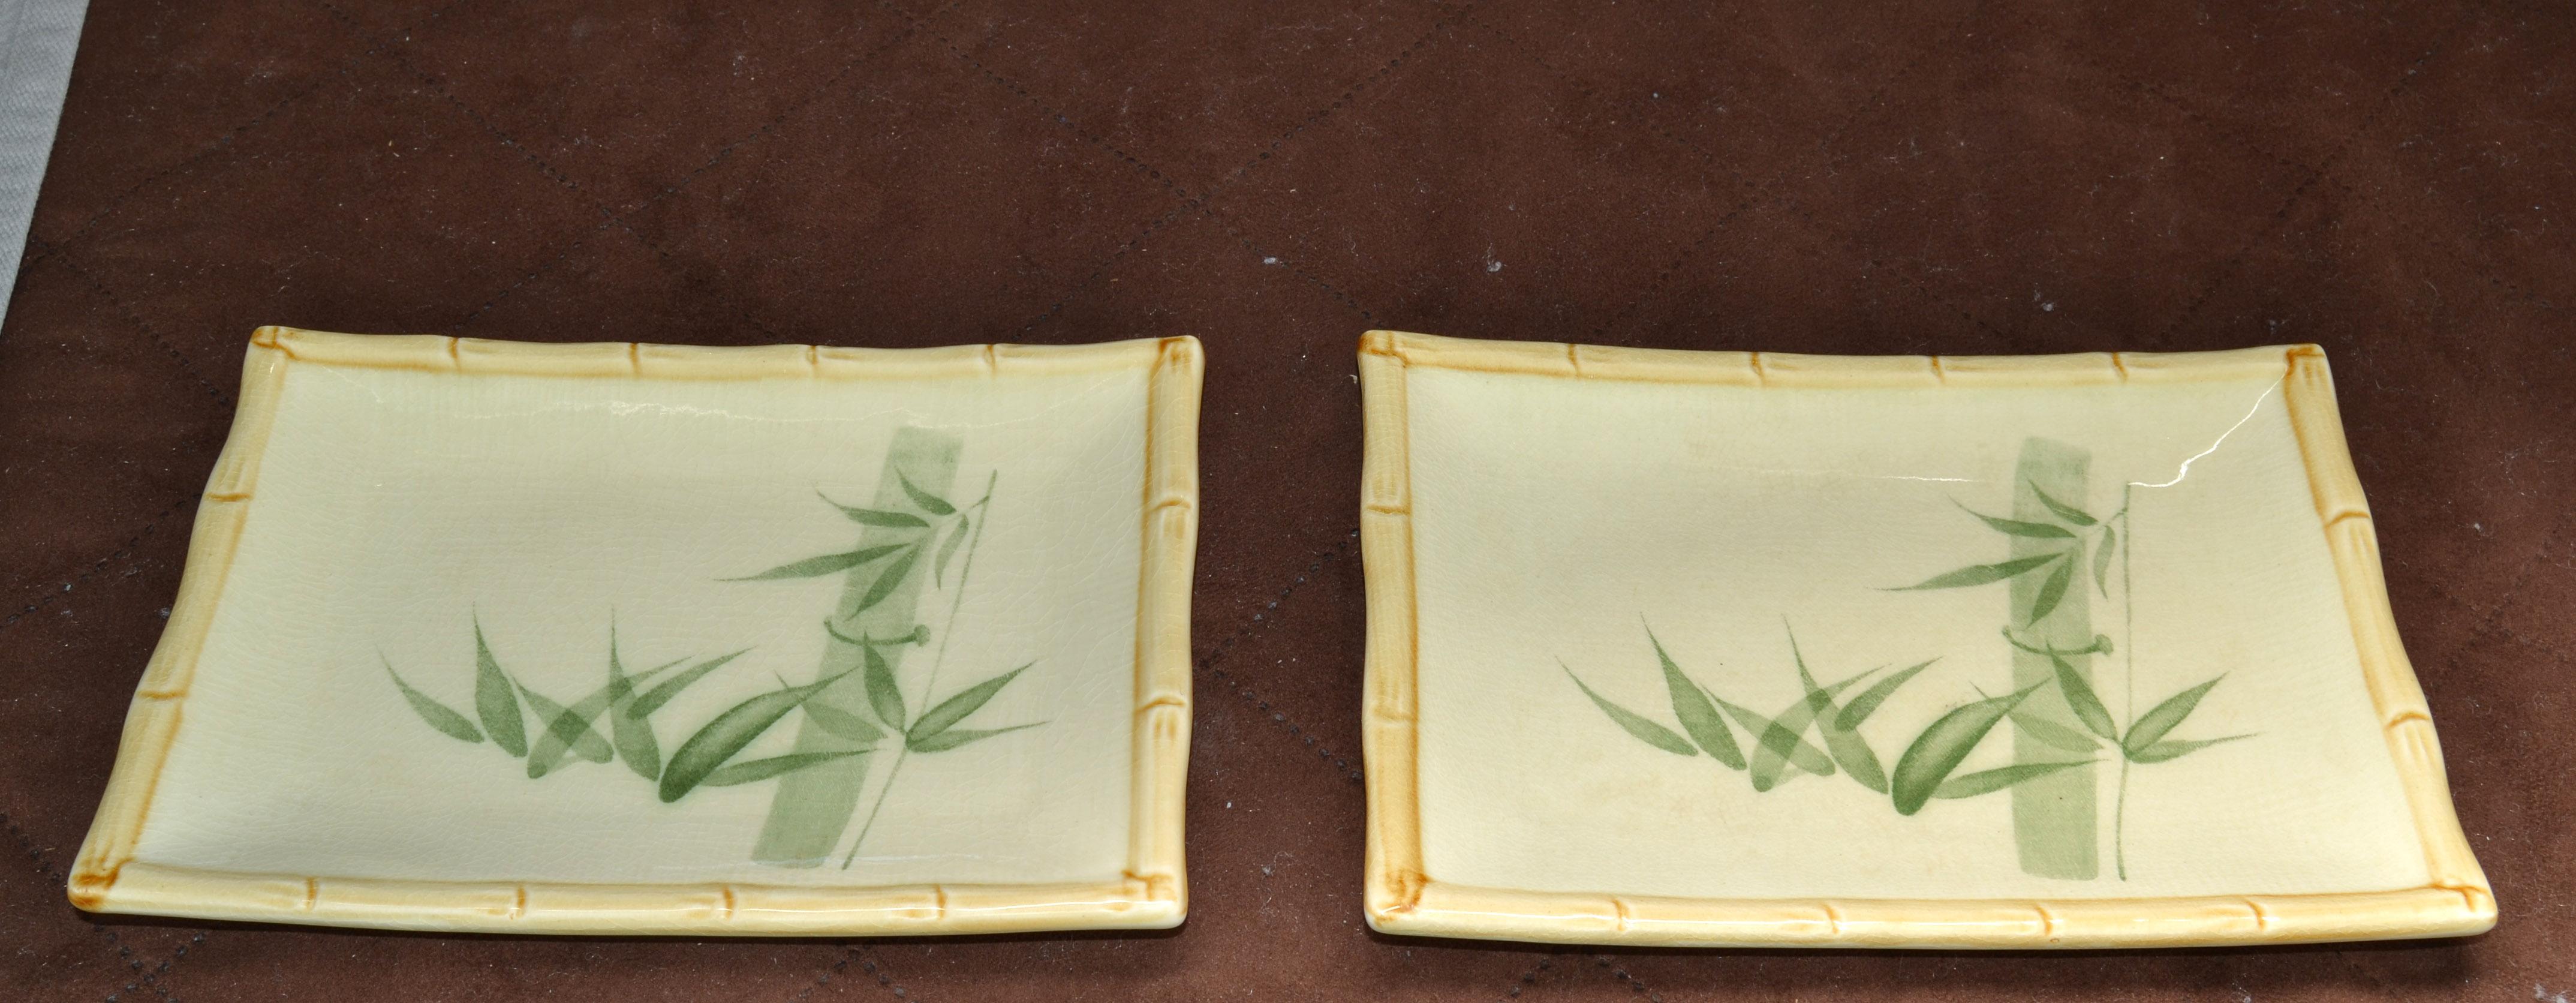 Pair Miya Japan Porcelain Sushi Serving Plates Trays Green Beige Bamboo Décor  In Good Condition For Sale In Miami, FL